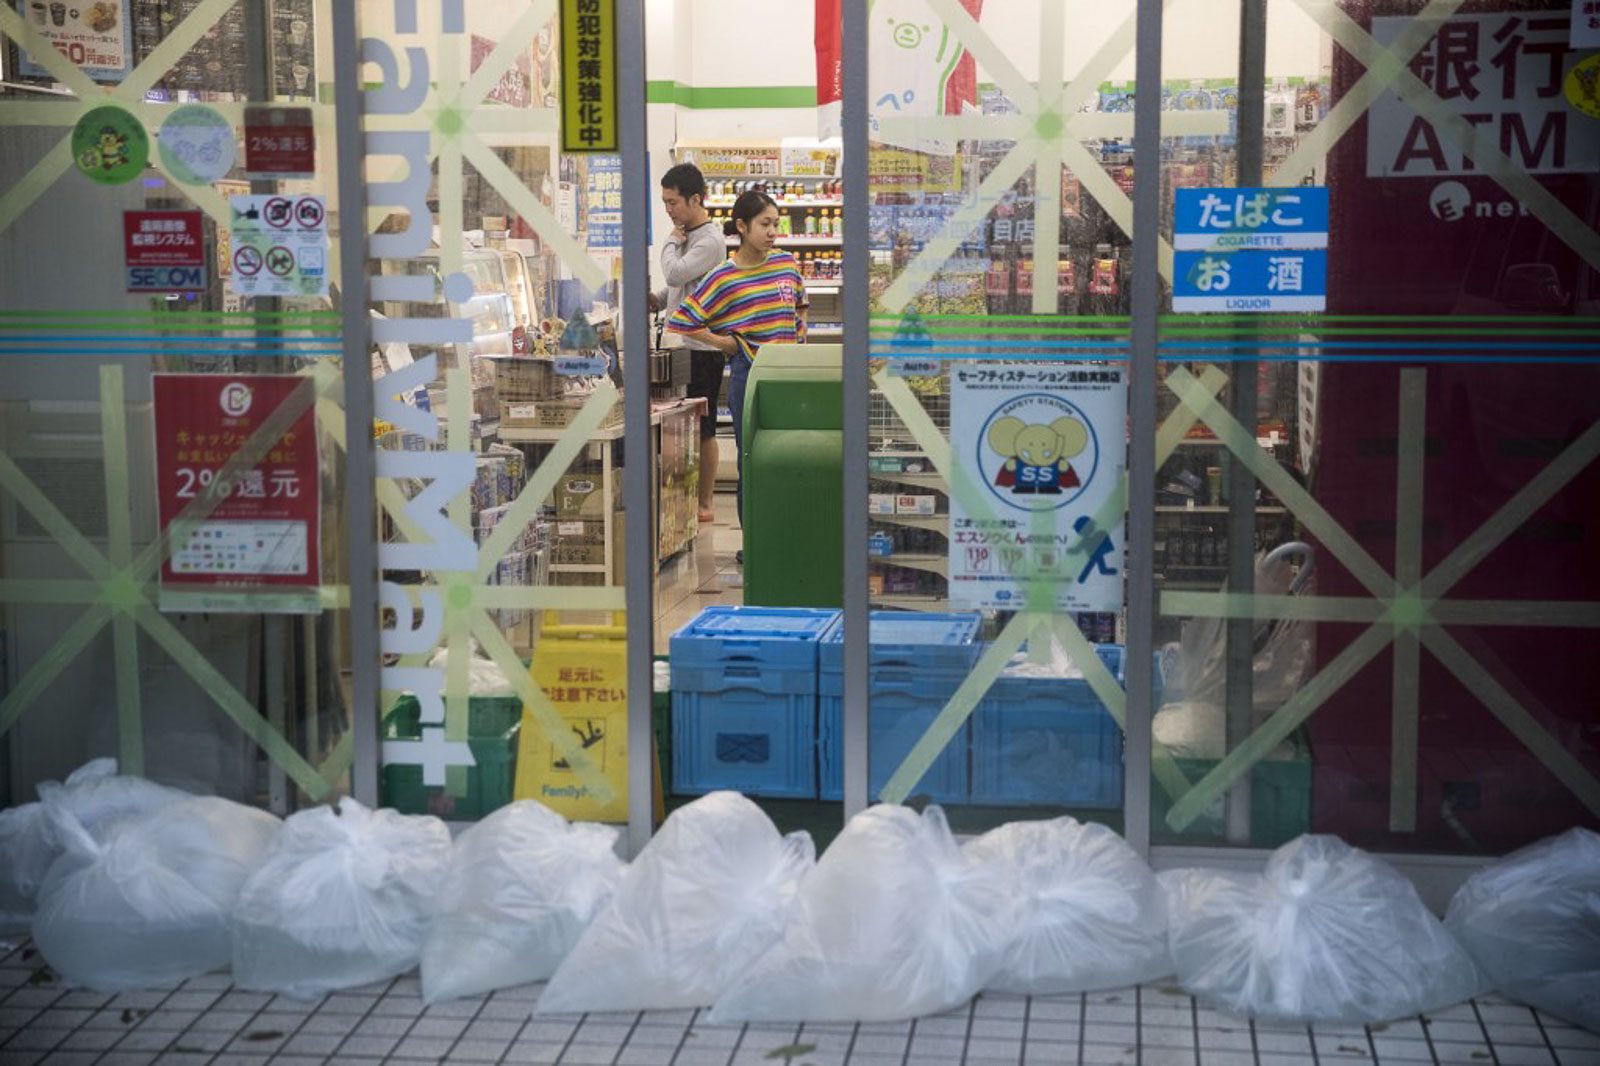 PREPARED. Taped up windows and bags filled with water to counter a flood surge greet last dash shoppers at a convenience store in the Shinagawa district of Tokyo on October 12, 2019, as the effects of Typhoon Hagibis begin to be felt in Japan's capital. Photo by Odd Andersen/AFP  